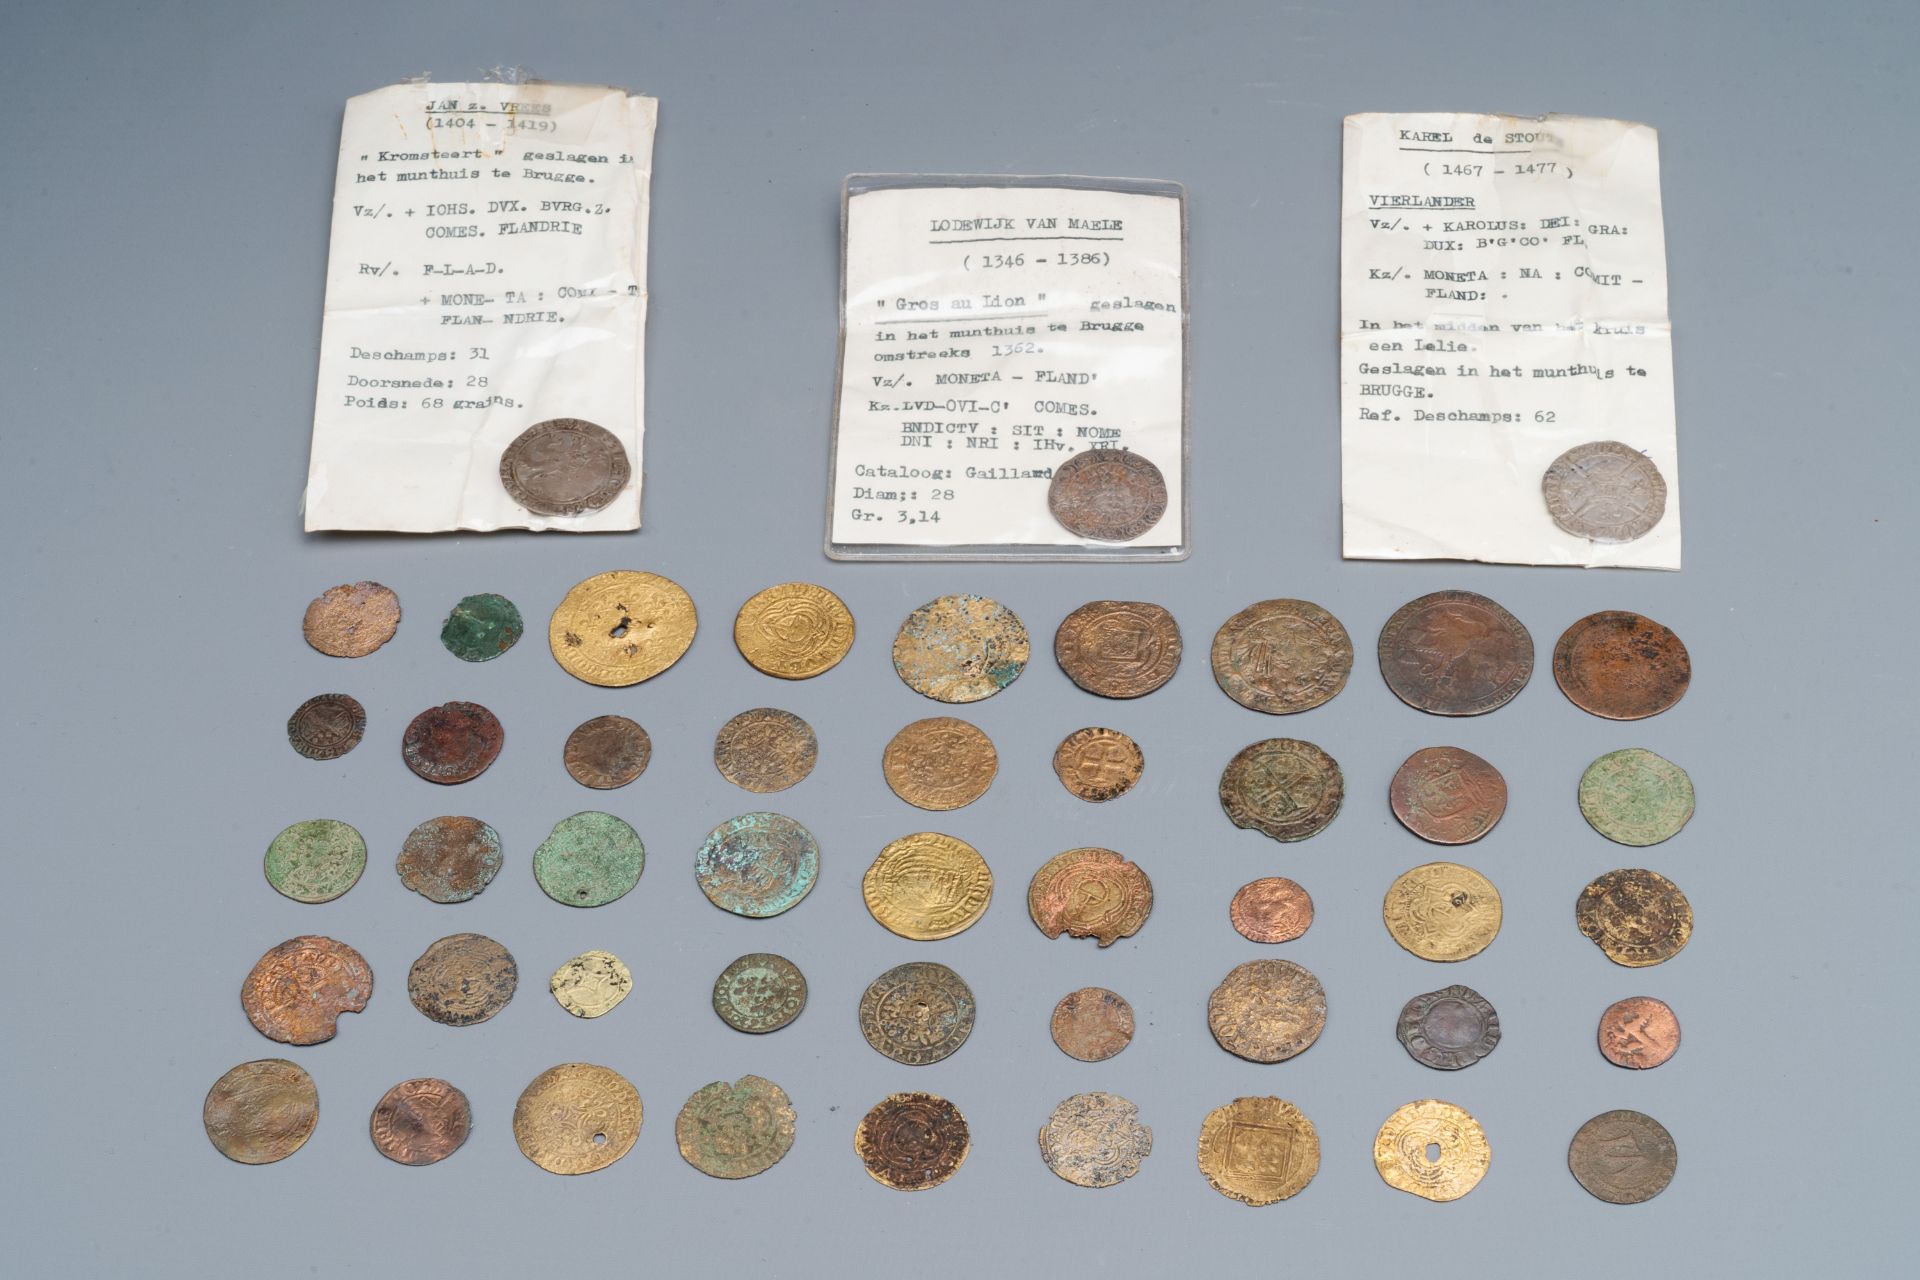 A varied collection of coins, 14th C. and later